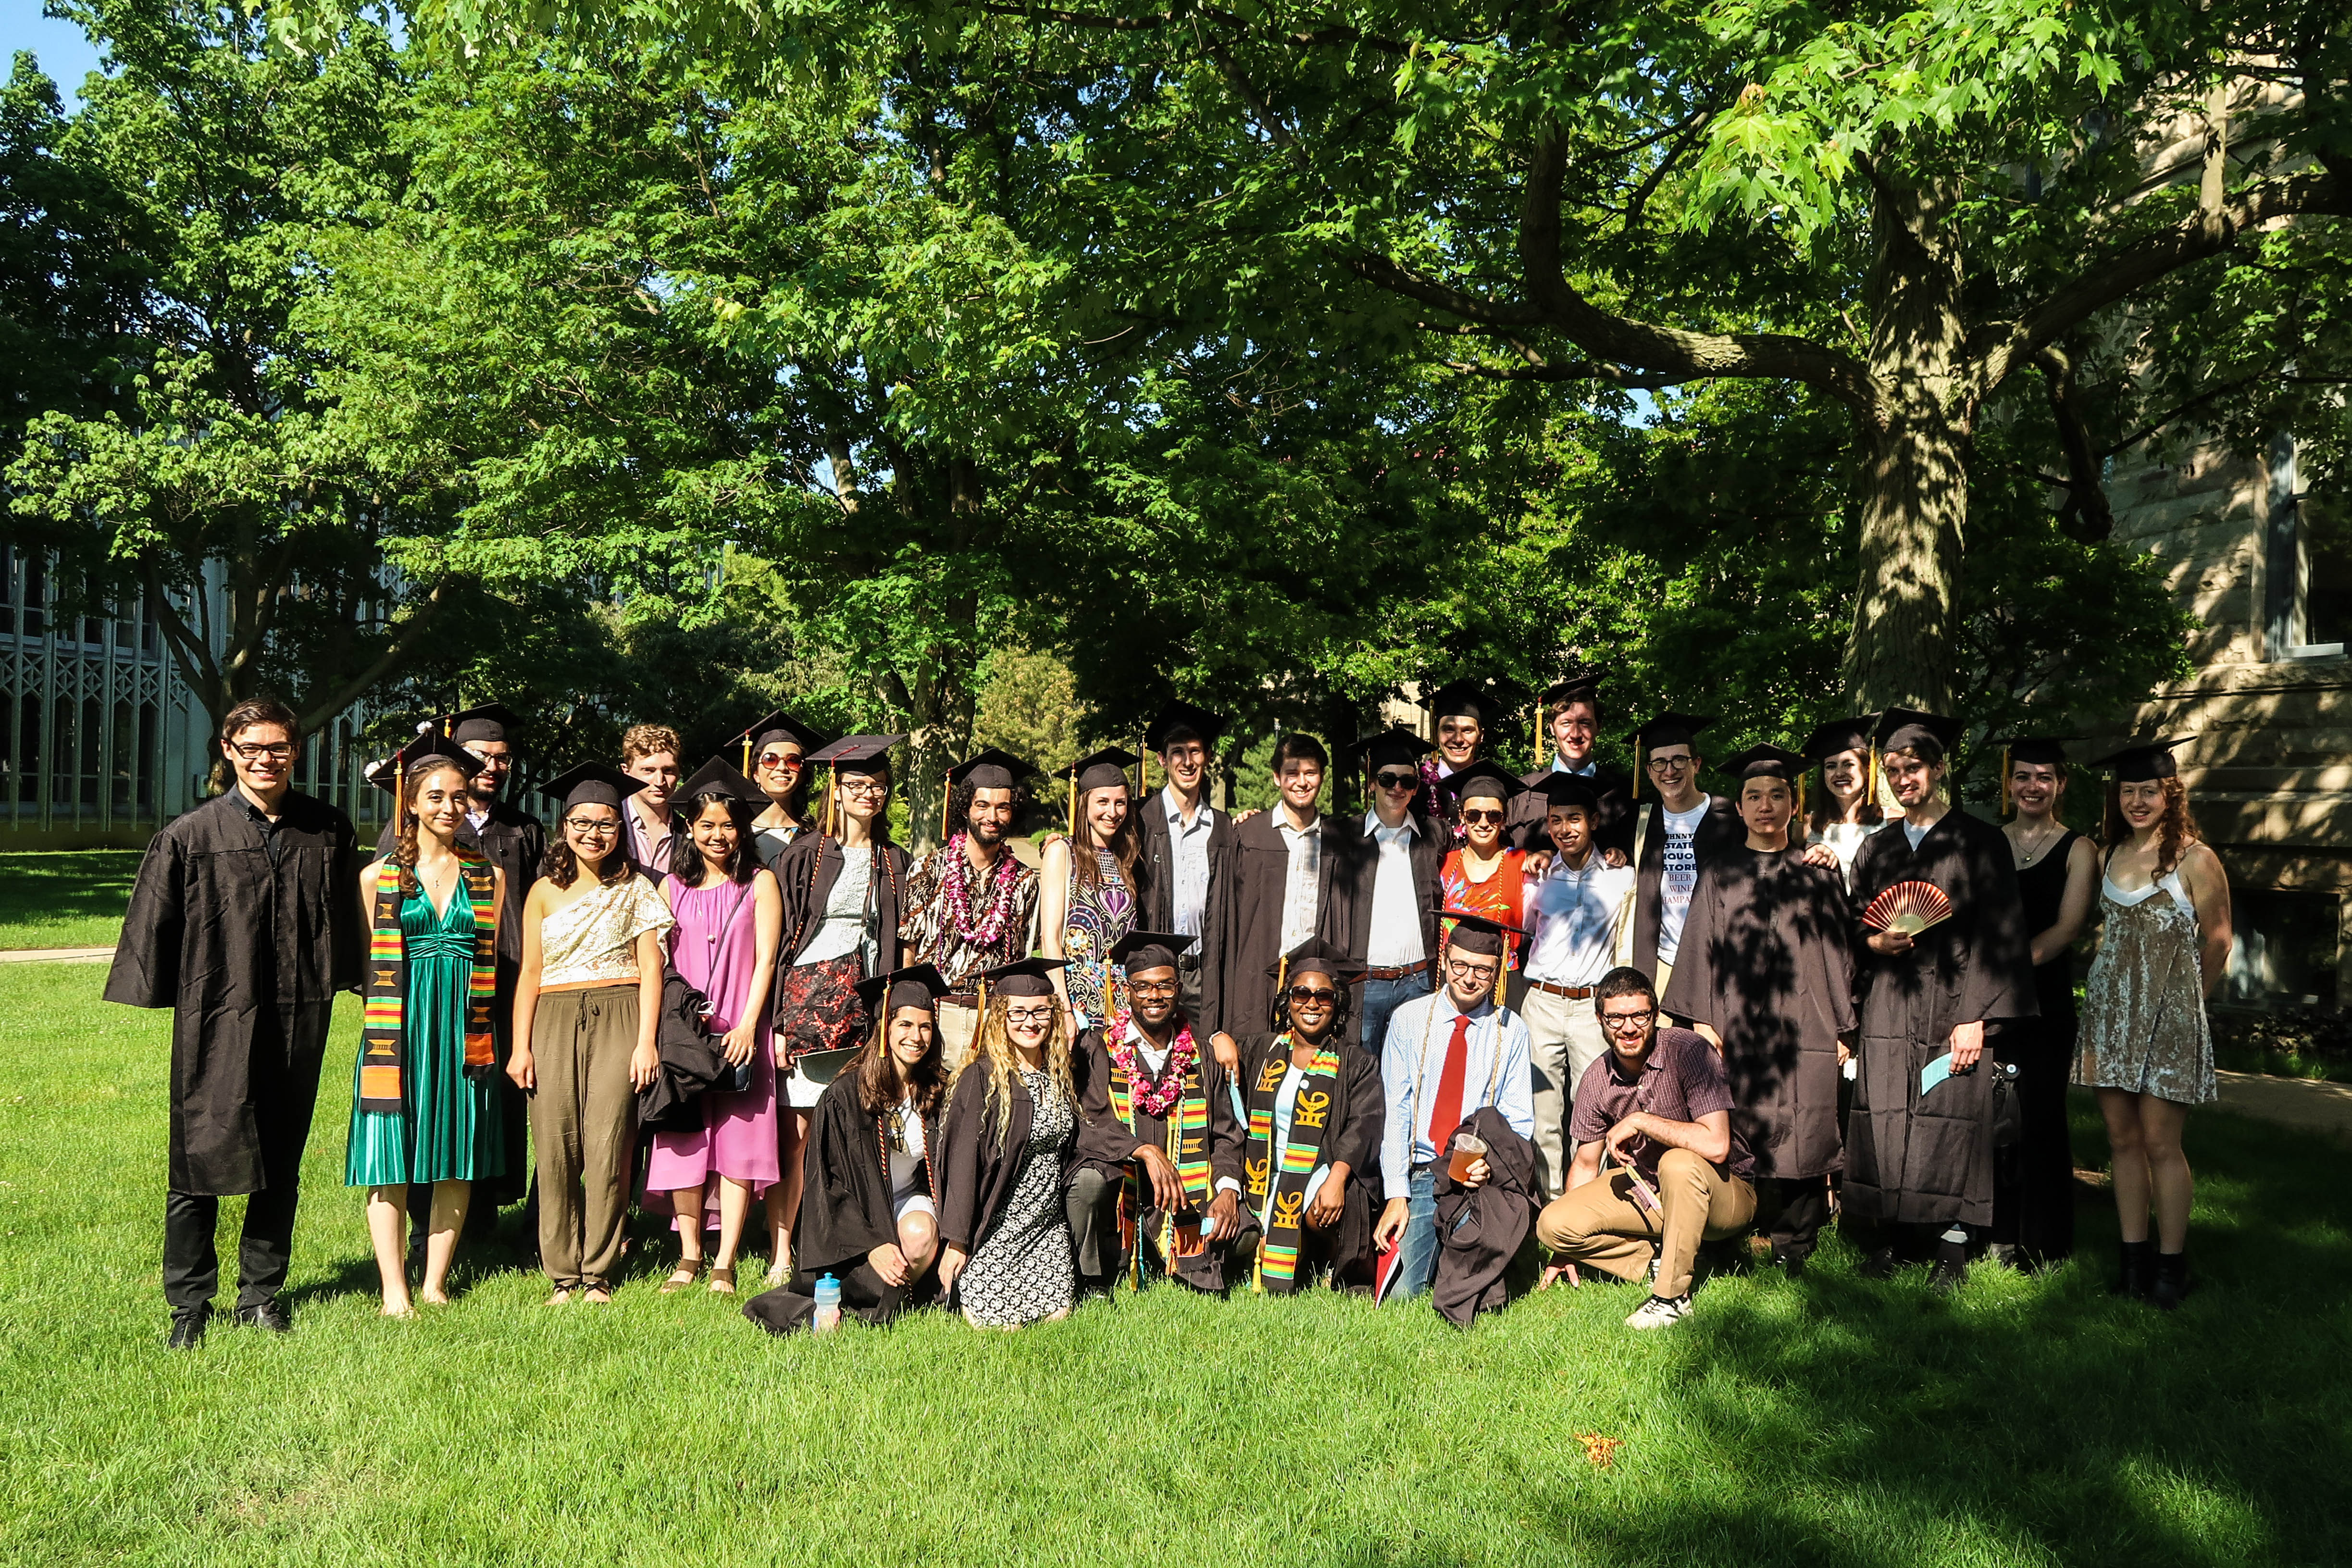 Members of the graduating double degree class of 2018